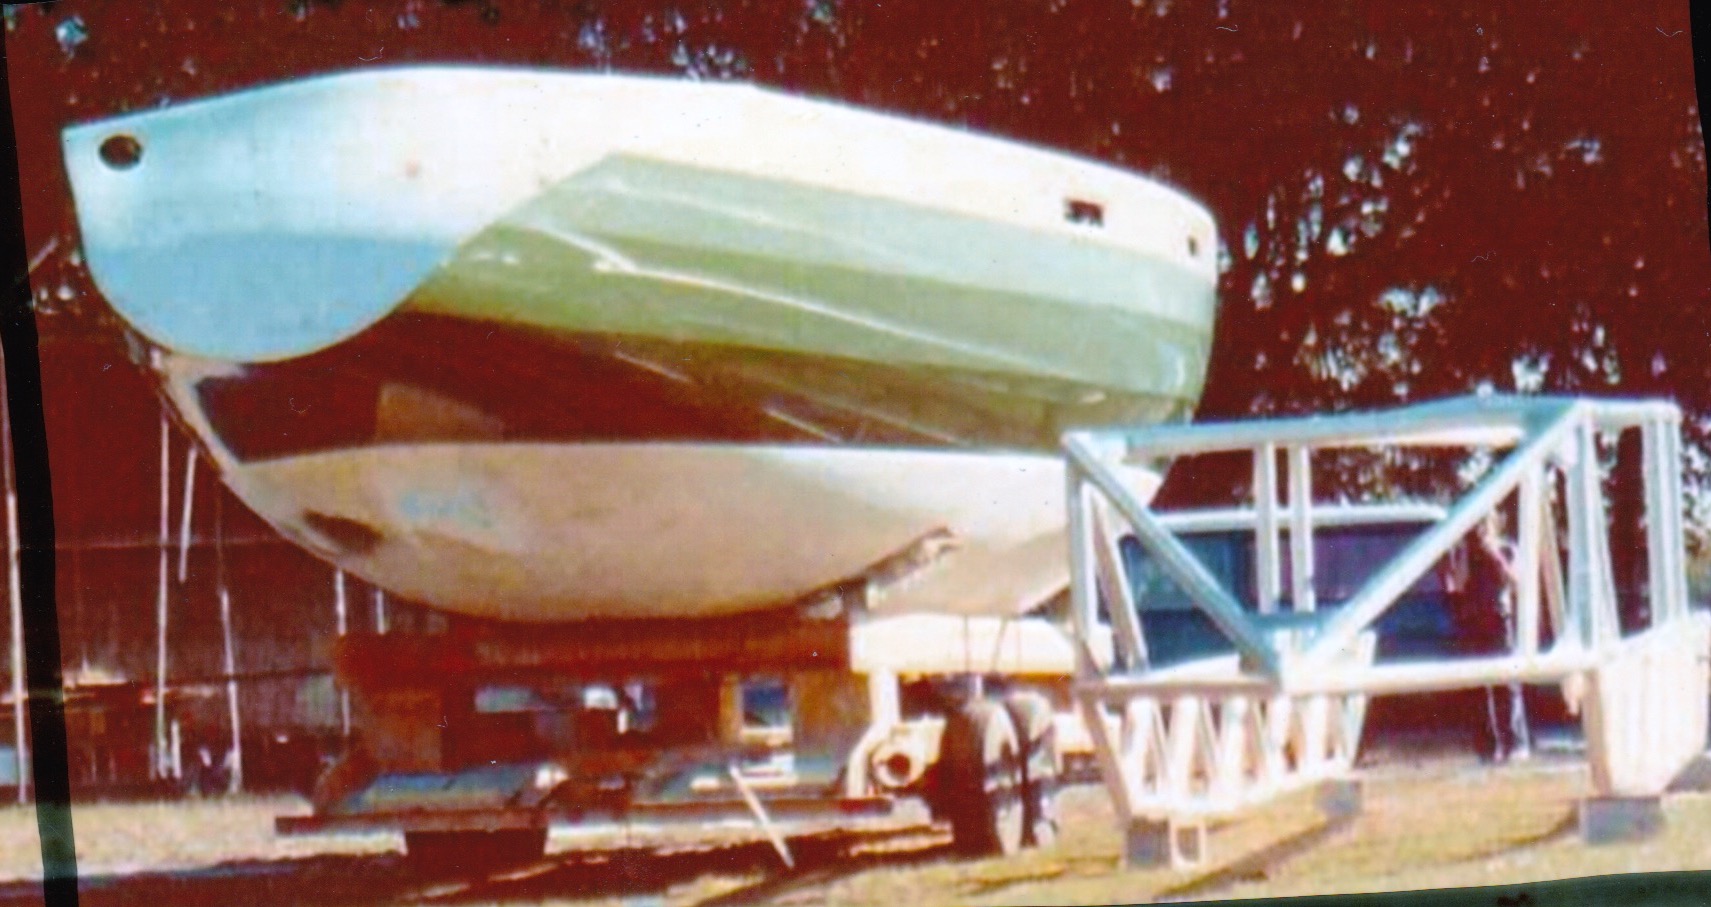 Hull for "imp" on trailer Plant City FL, USA, the boat also know as the Green Striped Machine due to its race success